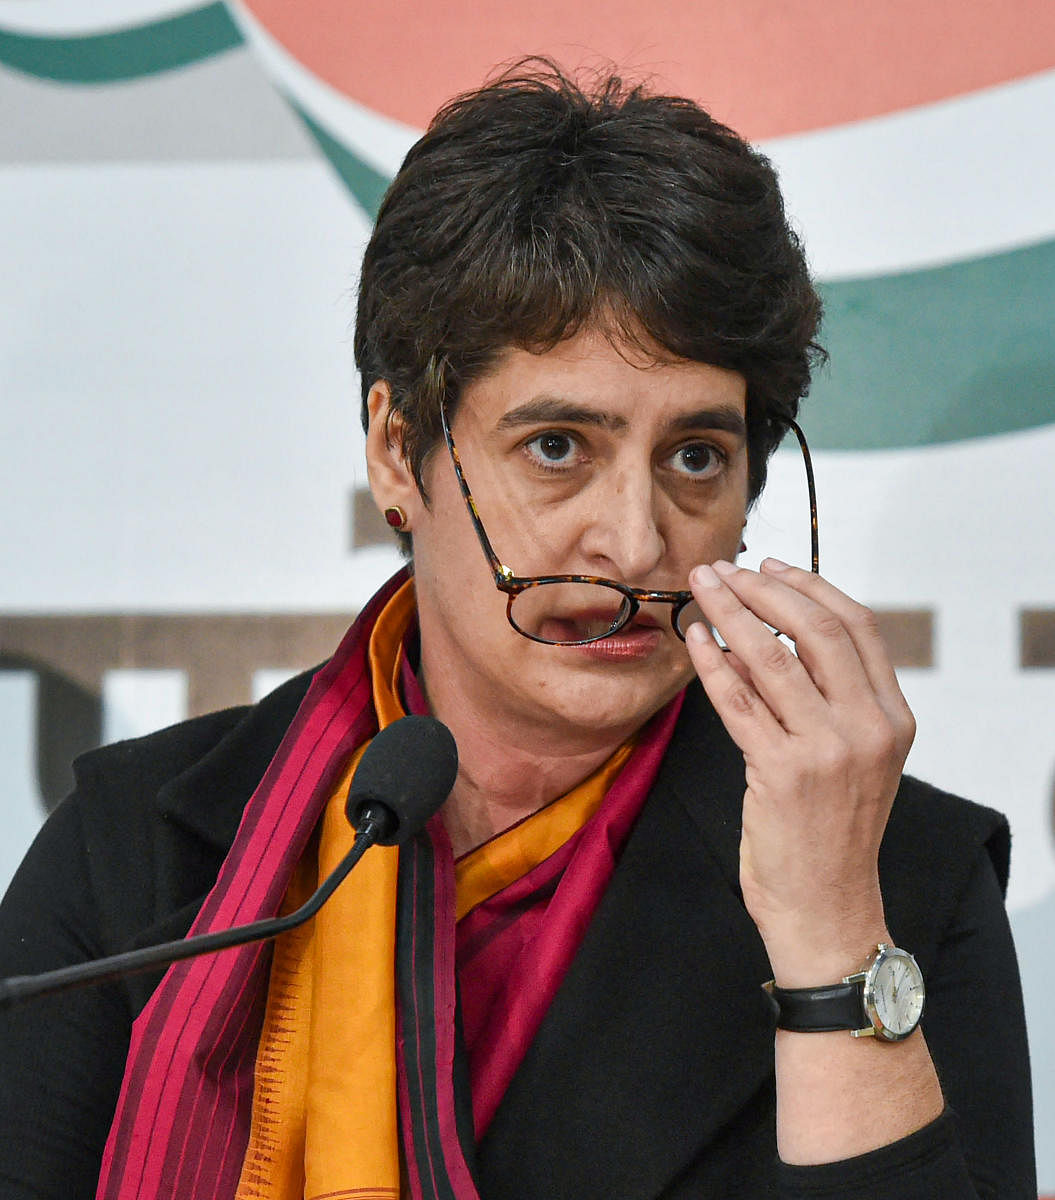  AICC general secretary Priyanka Gandhi Vadra at a press conference at the party office in Lucknow. PTI